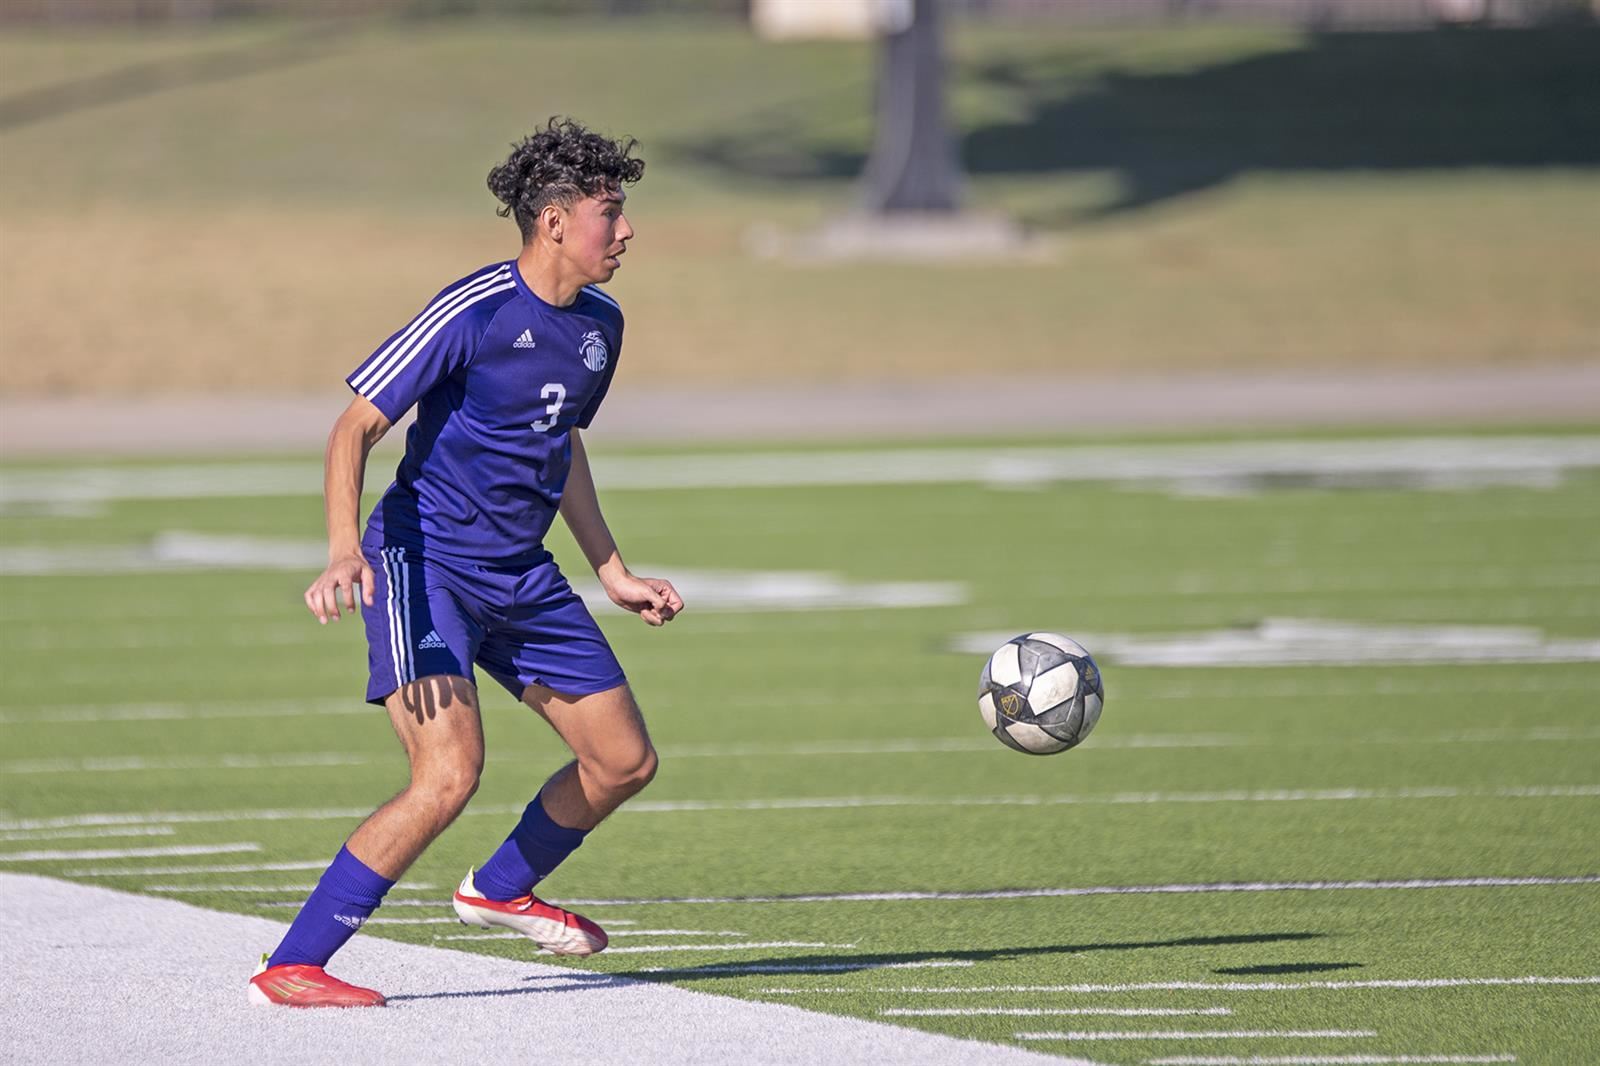 Jersey Village High School senior Jose Bejarano was voted District 17-6A’s Defensive Most Valuable Player.